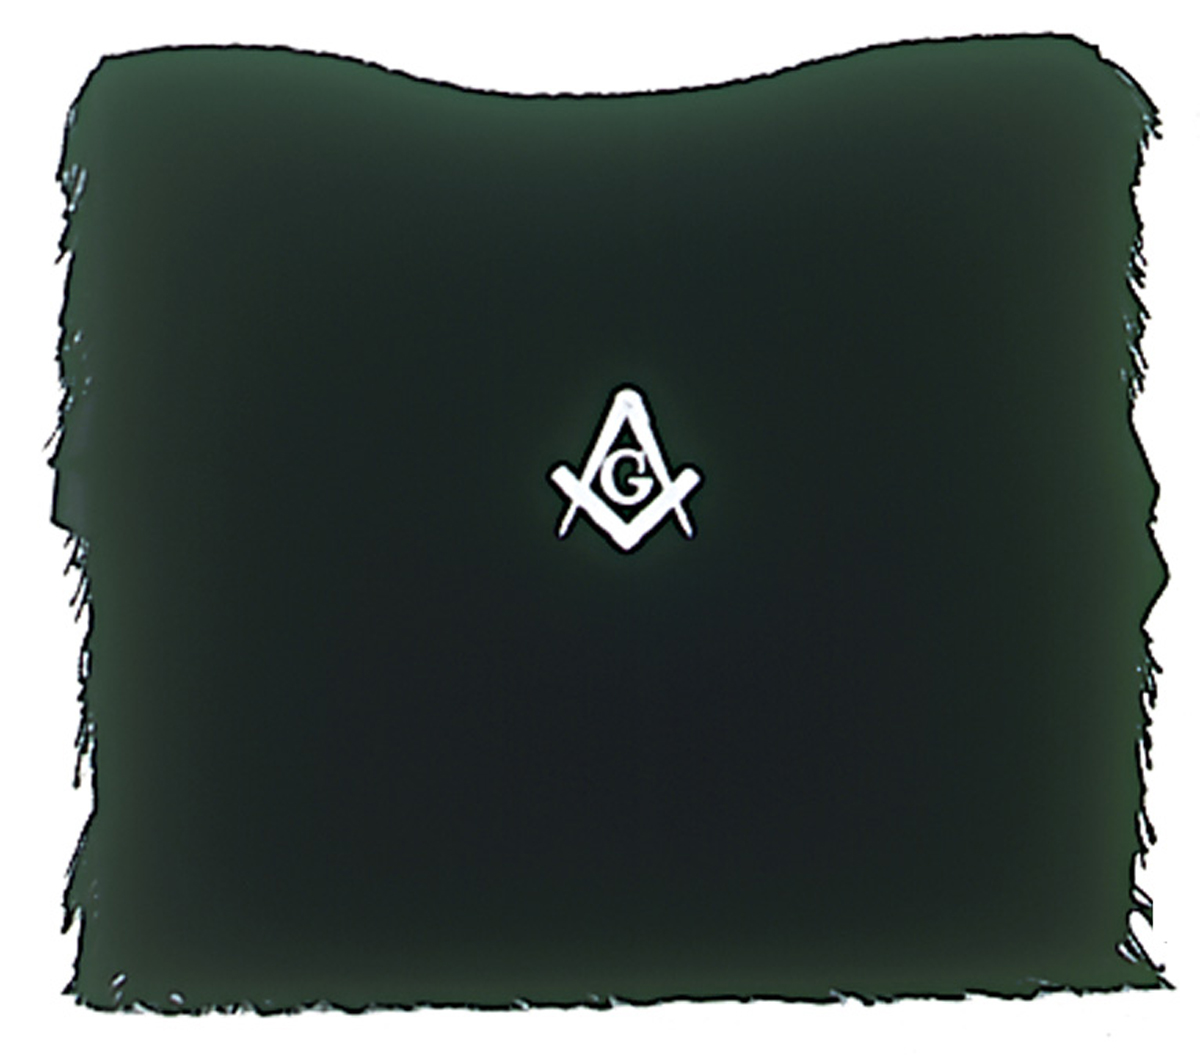 Masonic Lodge Ceremonial accessories LARGE Square and Compass 6 For  Bible-HSE